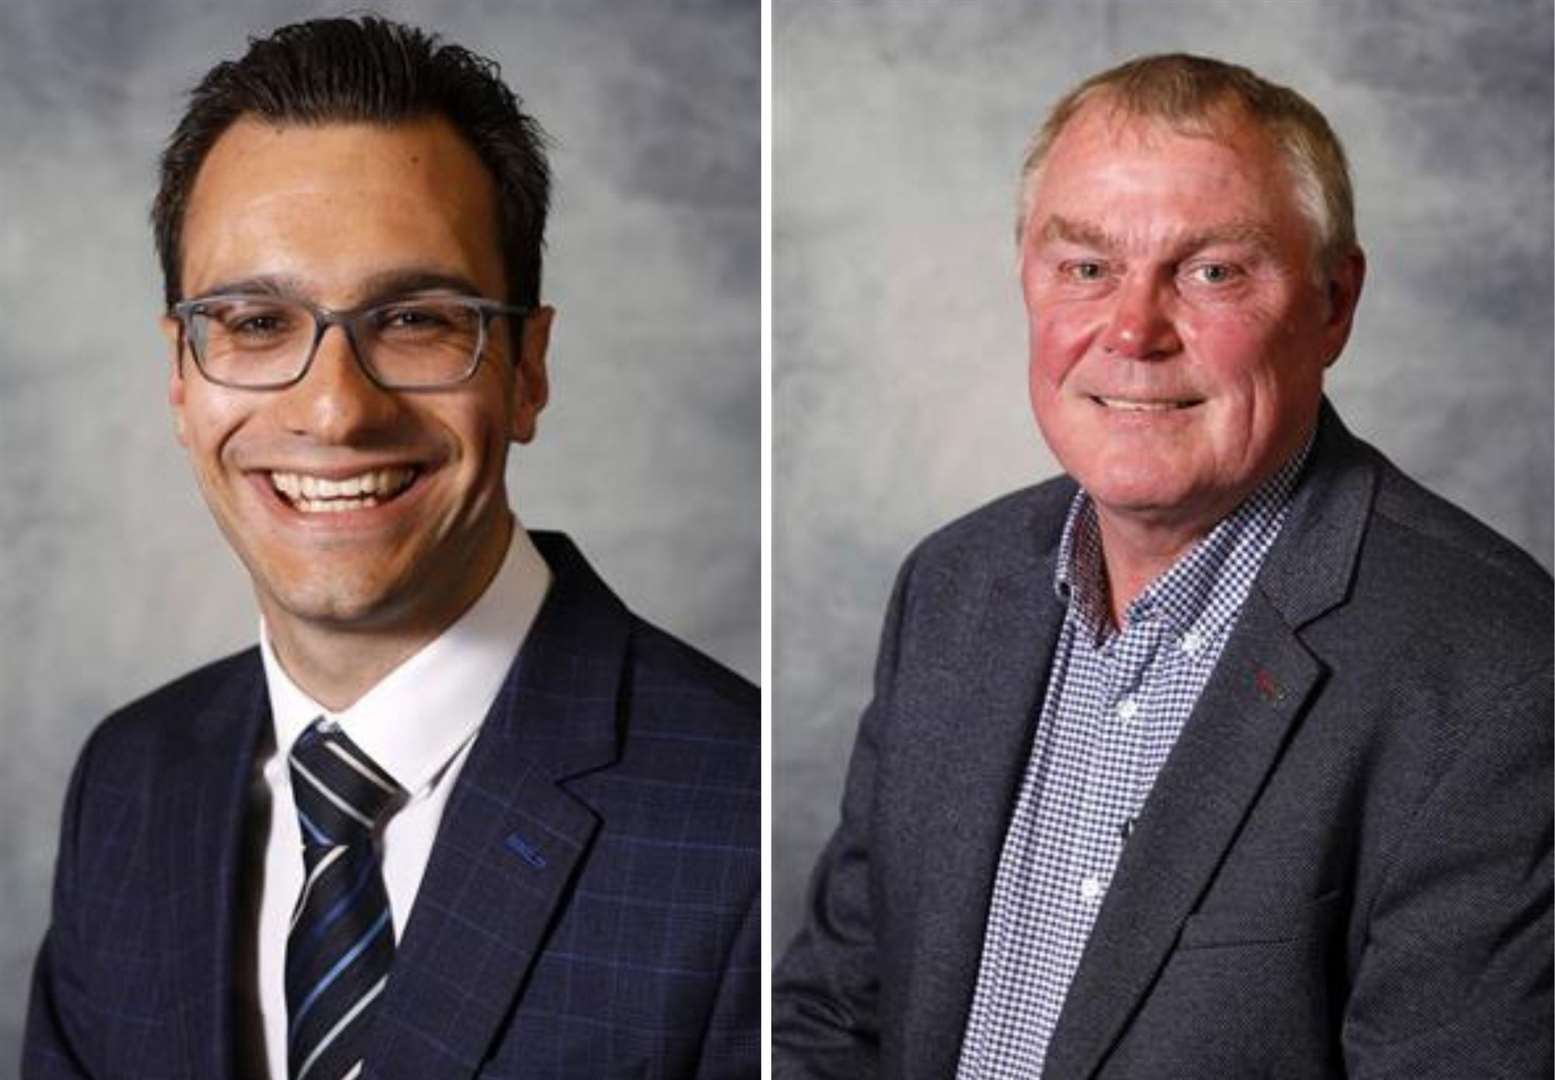 Cllrs George Perfect and Gary Hackwell have been selected as the Medway Tories' leader and deputy leader, respectively. Photo: Medway Council.